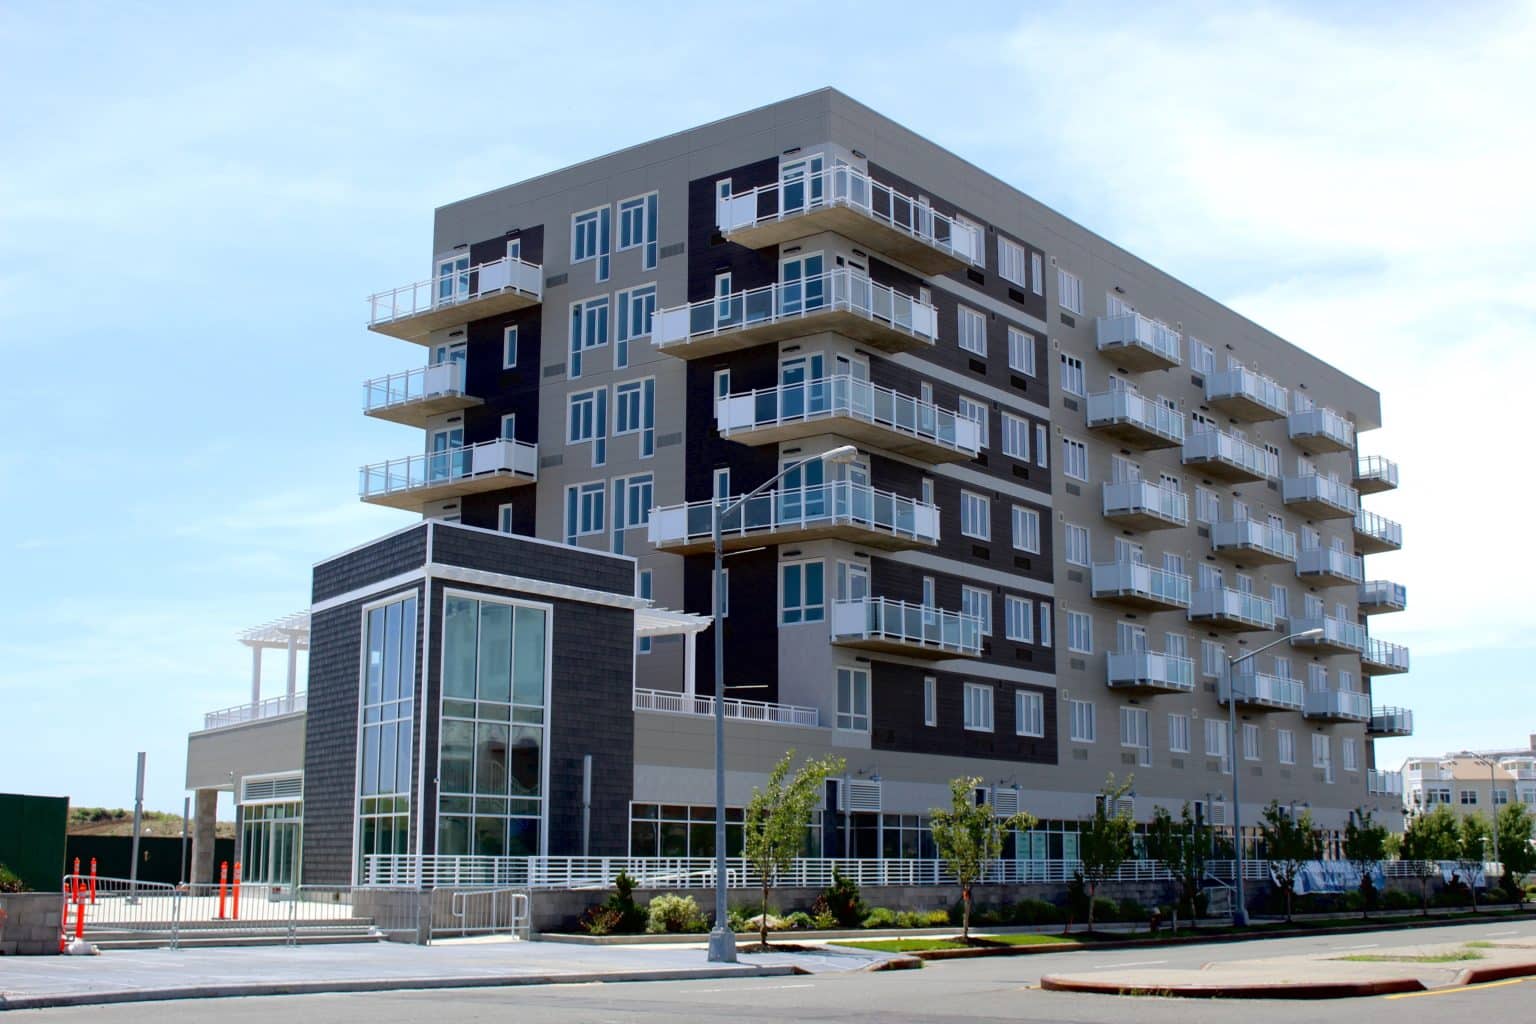 Exterior of The Tides apartments